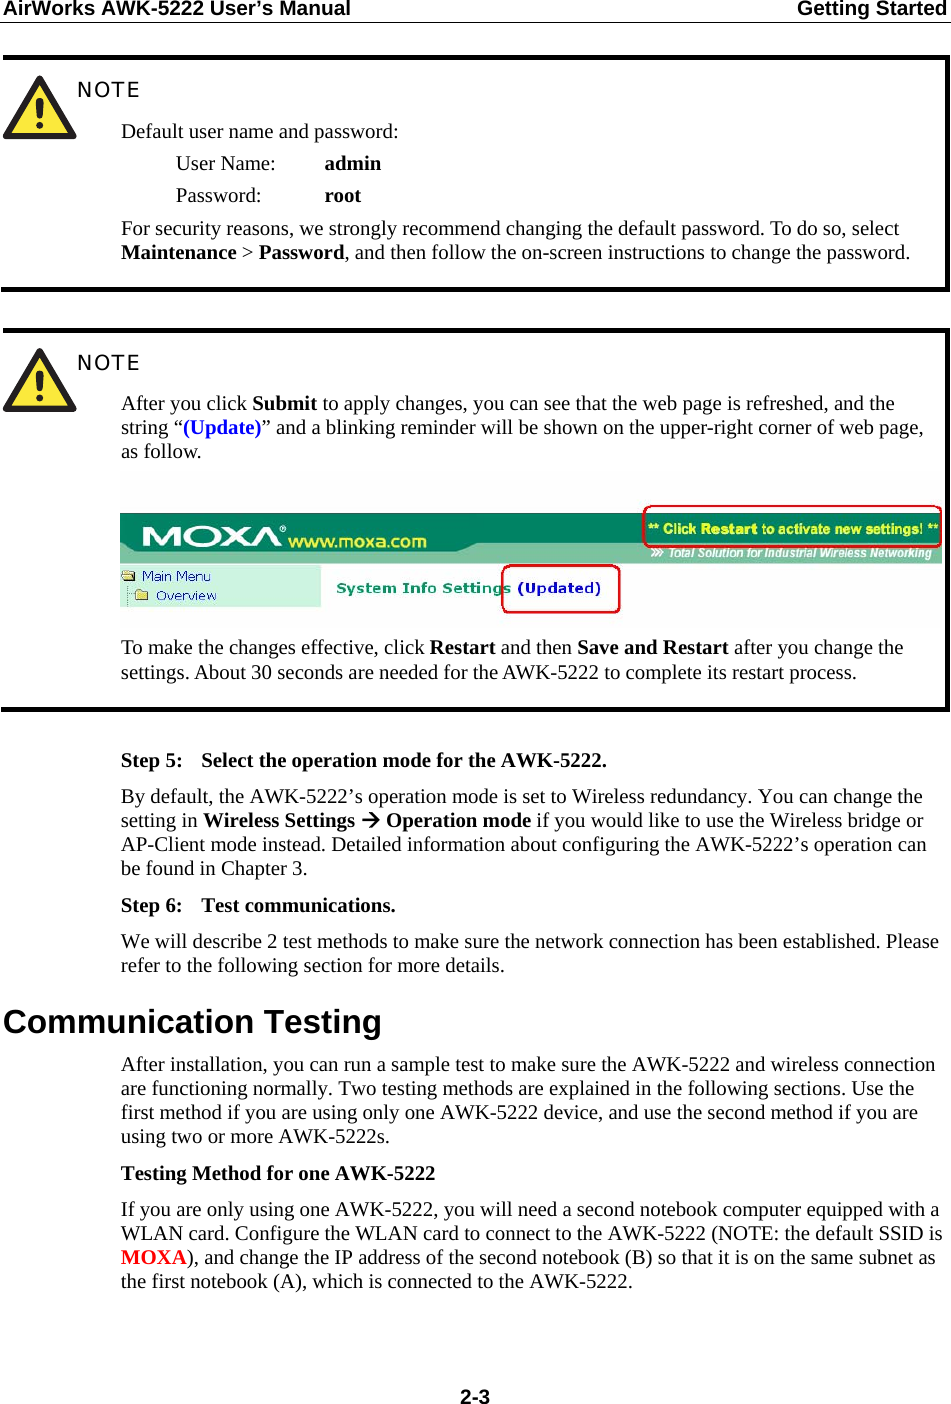 AirWorks AWK-5222 User’s Manual  Getting Started  2-3 NOTE Default user name and password:    User Name:  admin    Password:    root For security reasons, we strongly recommend changing the default password. To do so, select Maintenance &gt; Password, and then follow the on-screen instructions to change the password.   NOTE After you click Submit to apply changes, you can see that the web page is refreshed, and the string “(Update)” and a blinking reminder will be shown on the upper-right corner of web page, as follow. To make the changes effective, click Restart and then Save and Restart after you change the settings. About 30 seconds are needed for the AWK-5222 to complete its restart process.  Step 5:  Select the operation mode for the AWK-5222. By default, the AWK-5222’s operation mode is set to Wireless redundancy. You can change the setting in Wireless Settings Æ Operation mode if you would like to use the Wireless bridge or AP-Client mode instead. Detailed information about configuring the AWK-5222’s operation can be found in Chapter 3. Step 6:  Test communications. We will describe 2 test methods to make sure the network connection has been established. Please refer to the following section for more details. Communication Testing After installation, you can run a sample test to make sure the AWK-5222 and wireless connection are functioning normally. Two testing methods are explained in the following sections. Use the first method if you are using only one AWK-5222 device, and use the second method if you are using two or more AWK-5222s. Testing Method for one AWK-5222 If you are only using one AWK-5222, you will need a second notebook computer equipped with a WLAN card. Configure the WLAN card to connect to the AWK-5222 (NOTE: the default SSID is MOXA), and change the IP address of the second notebook (B) so that it is on the same subnet as the first notebook (A), which is connected to the AWK-5222.  